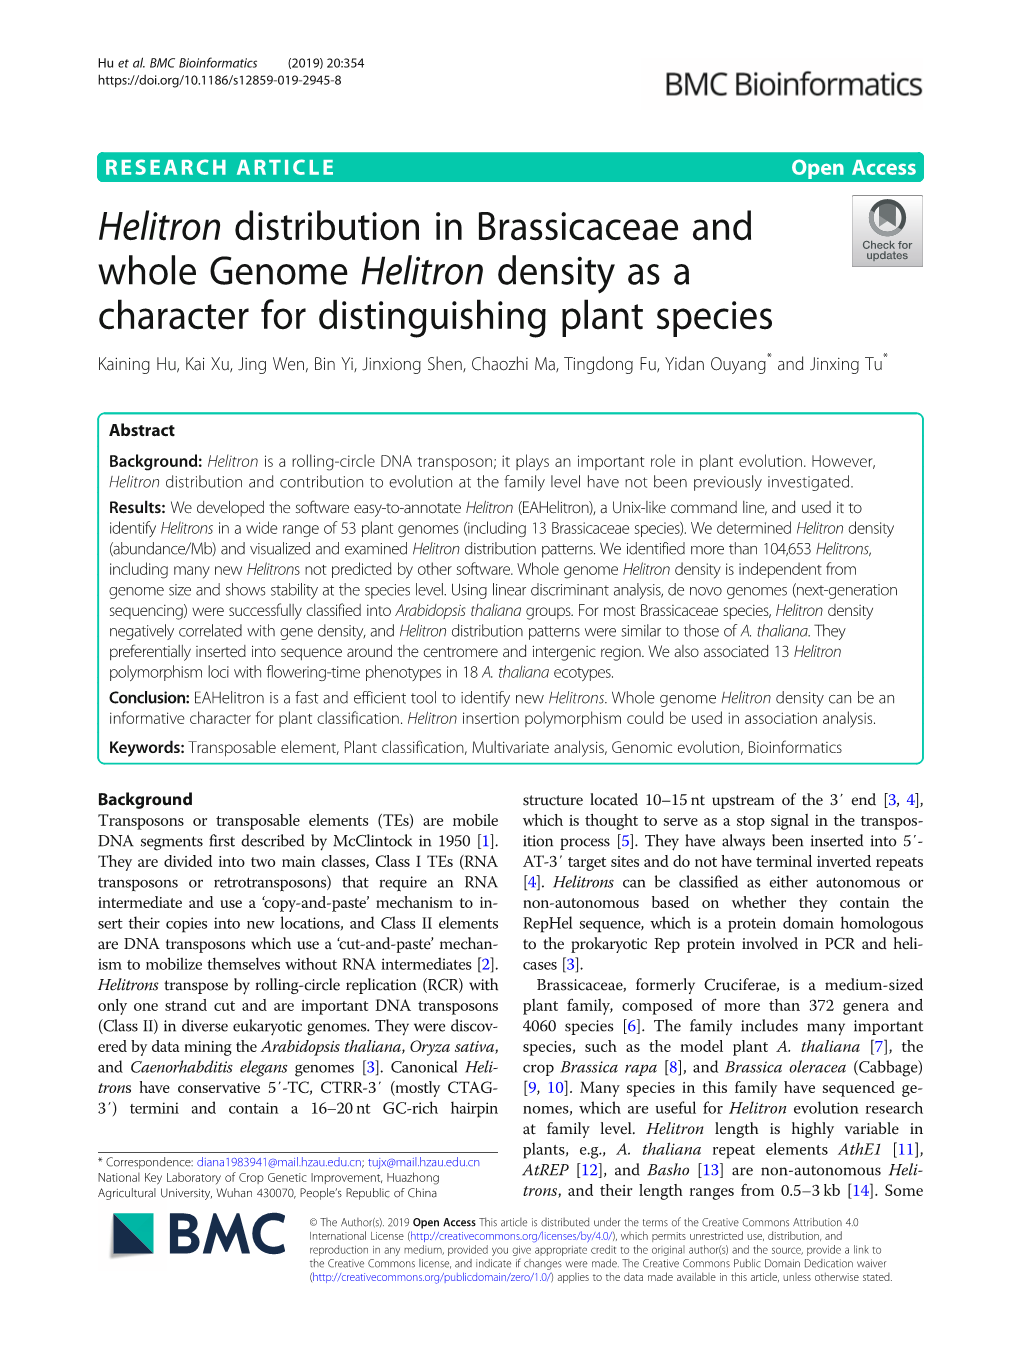 Helitron Distribution in Brassicaceae and Whole Genome Helitron Density